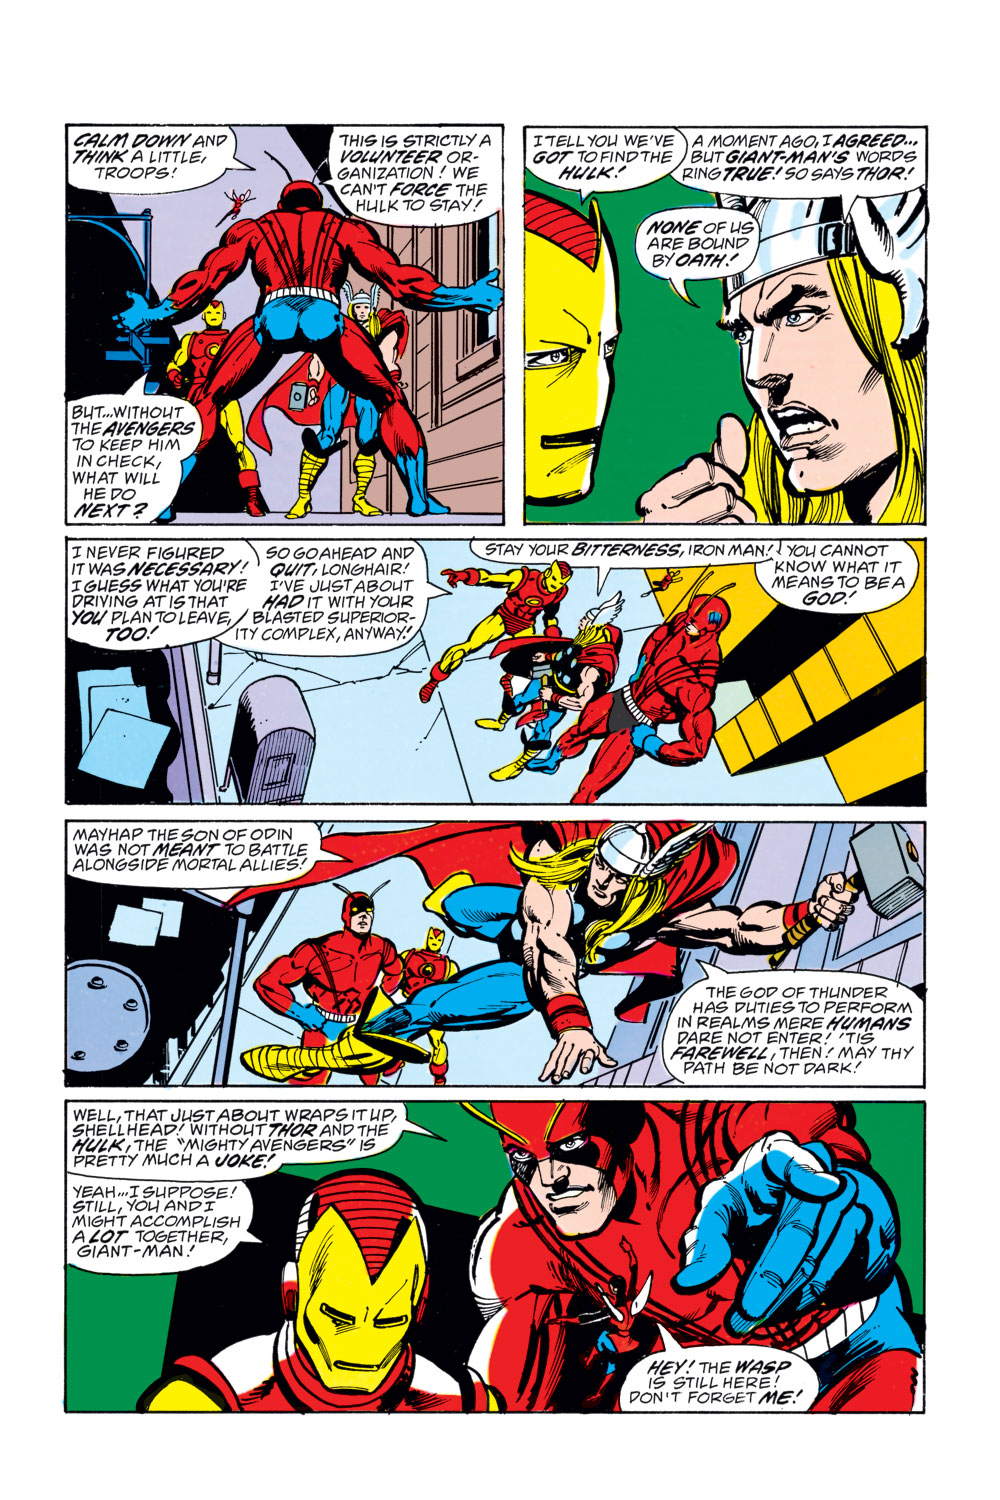 What If? (1977) issue 3 - The Avengers had never been - Page 5